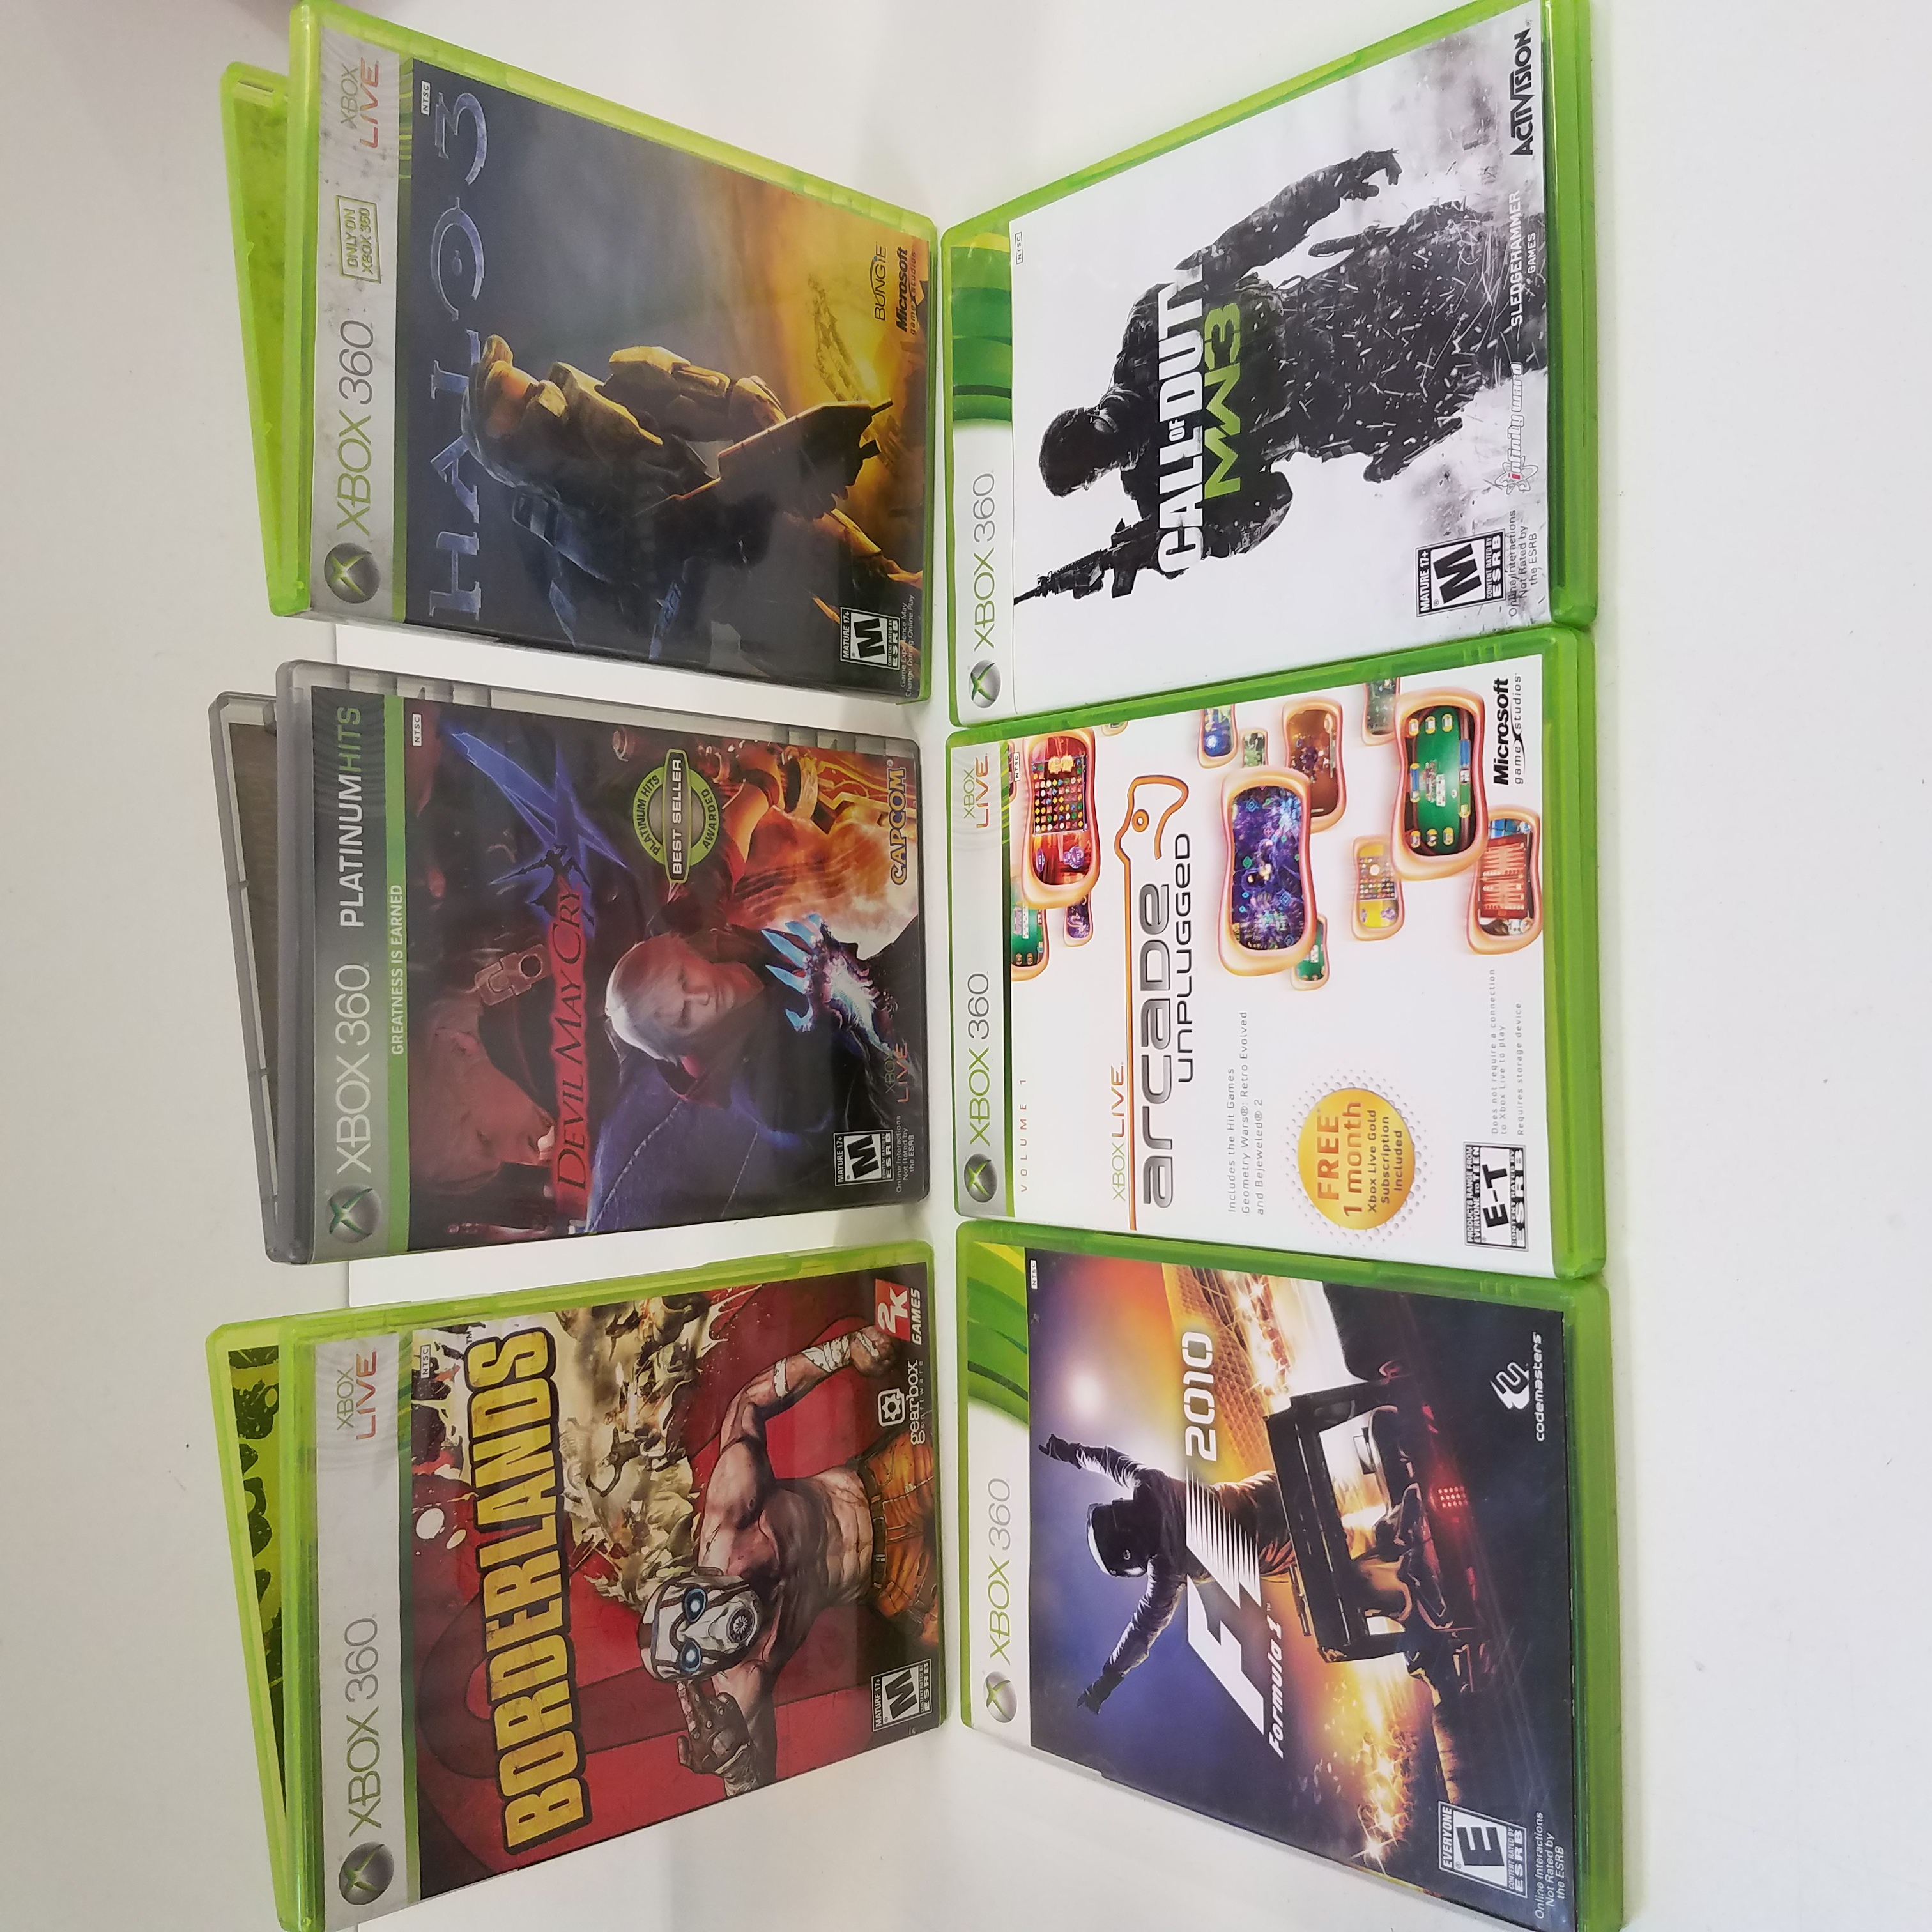 Xbox Game Pass: NBA Playgrounds, Injustice, Devil May Cry 4 and $1